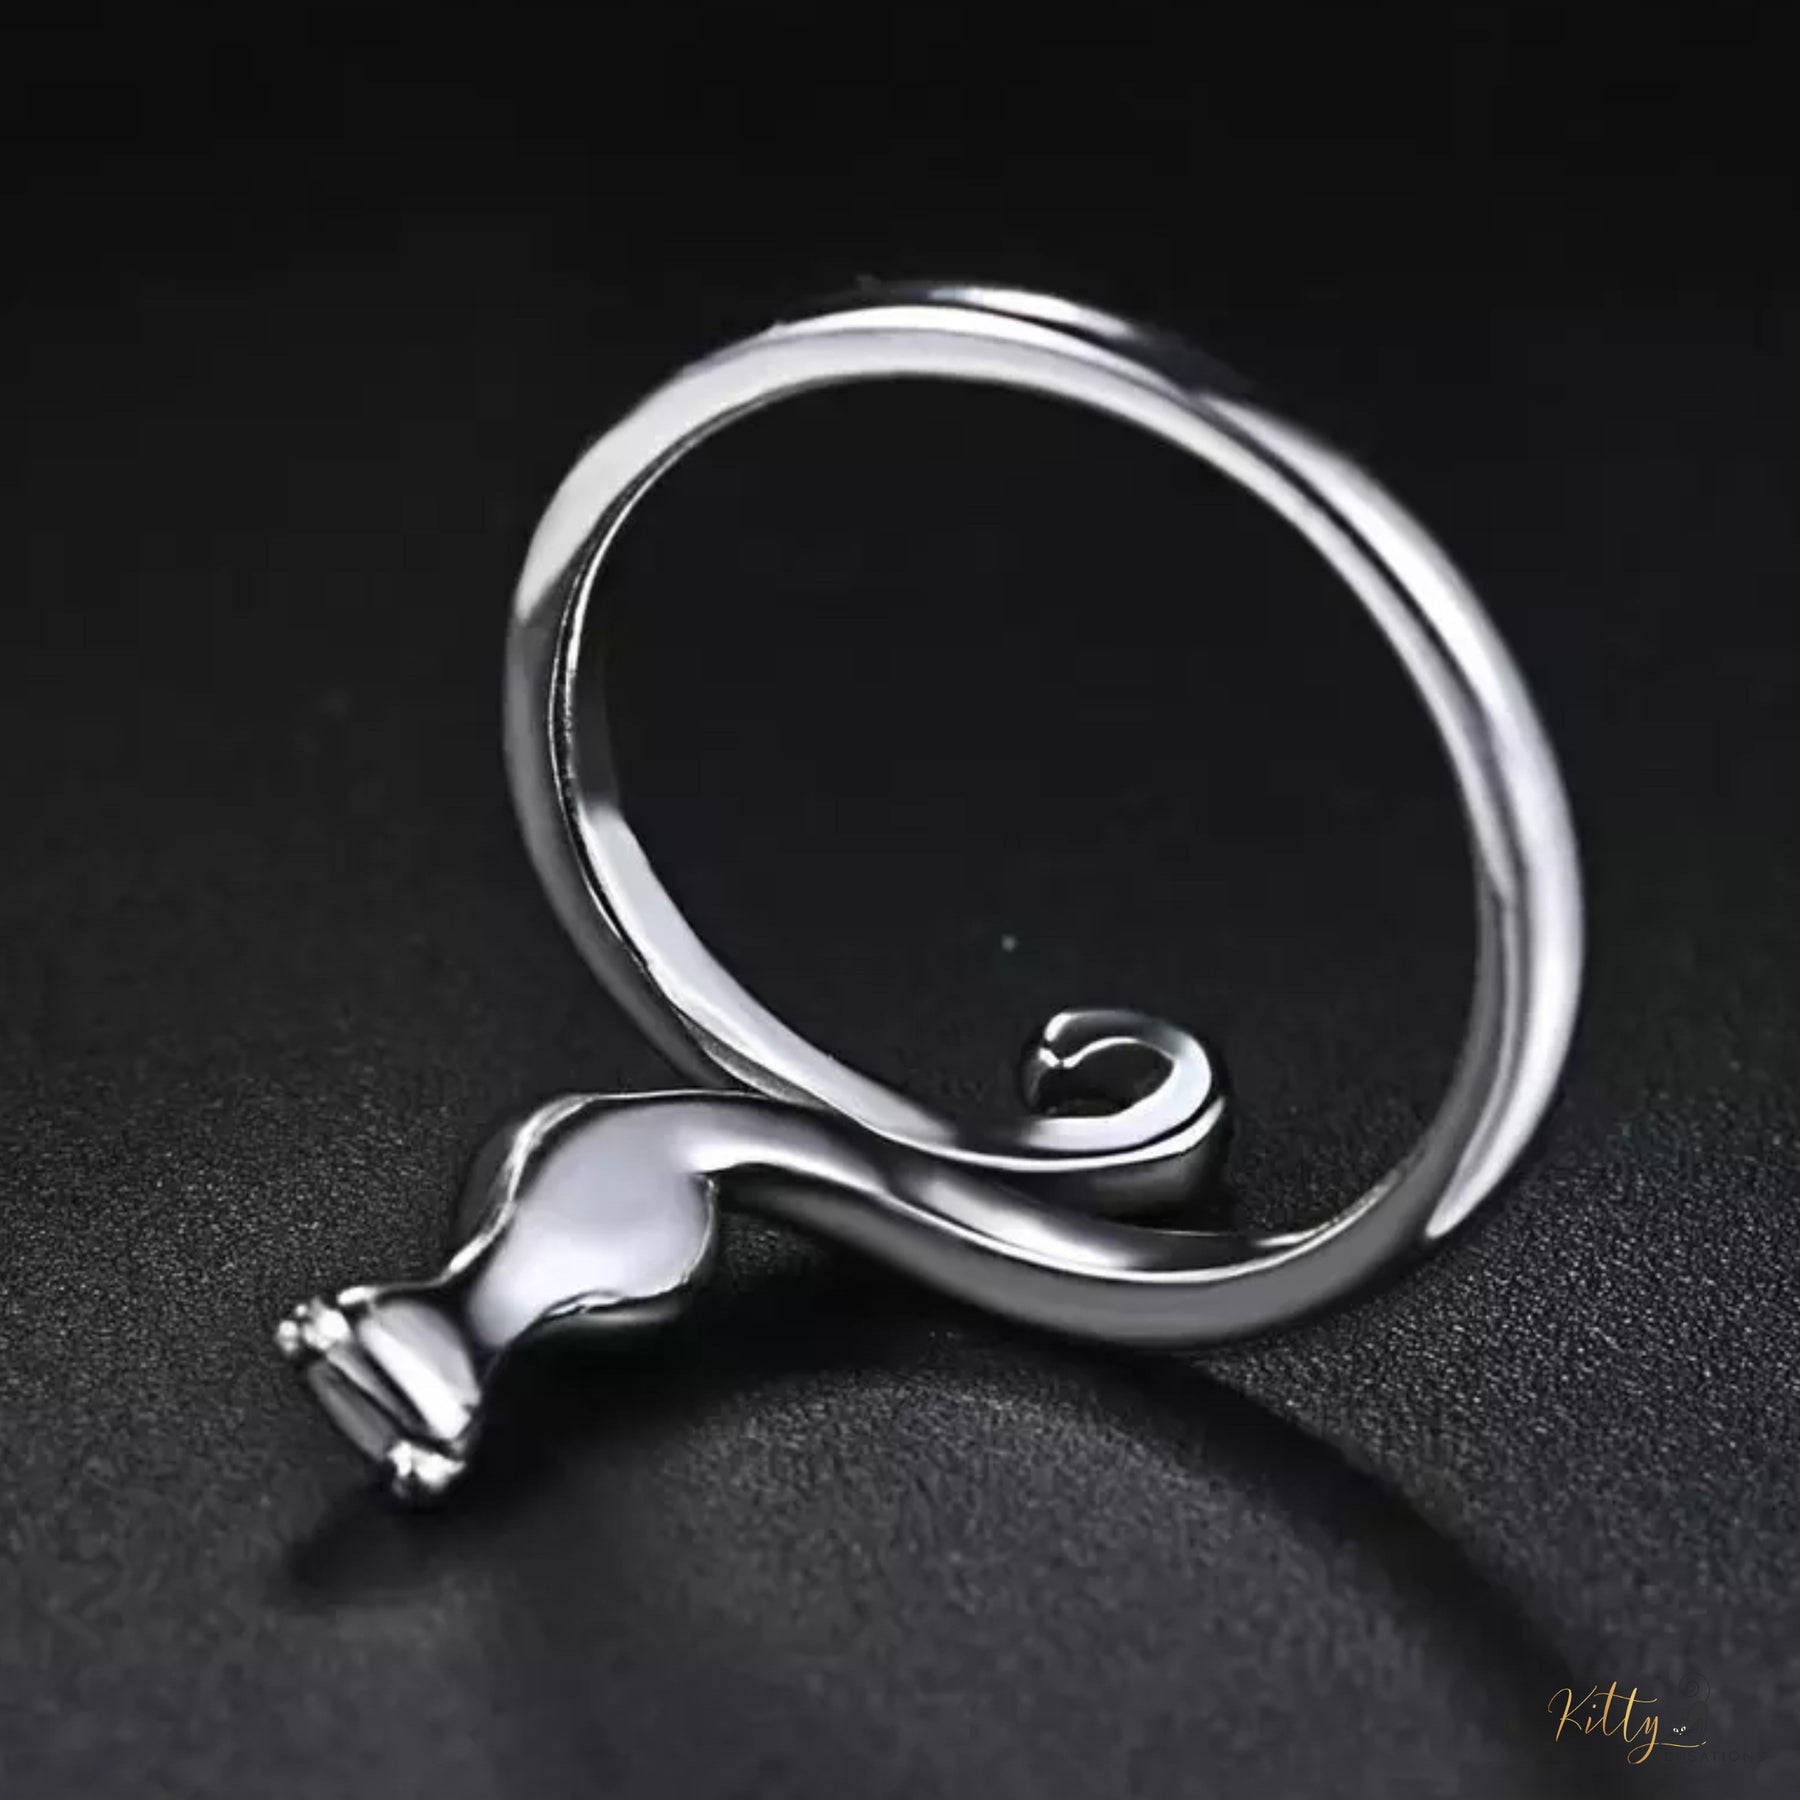 Peaceful Kitty Open Ring in Solid 925 Sterling Silver (Platinum Plated)